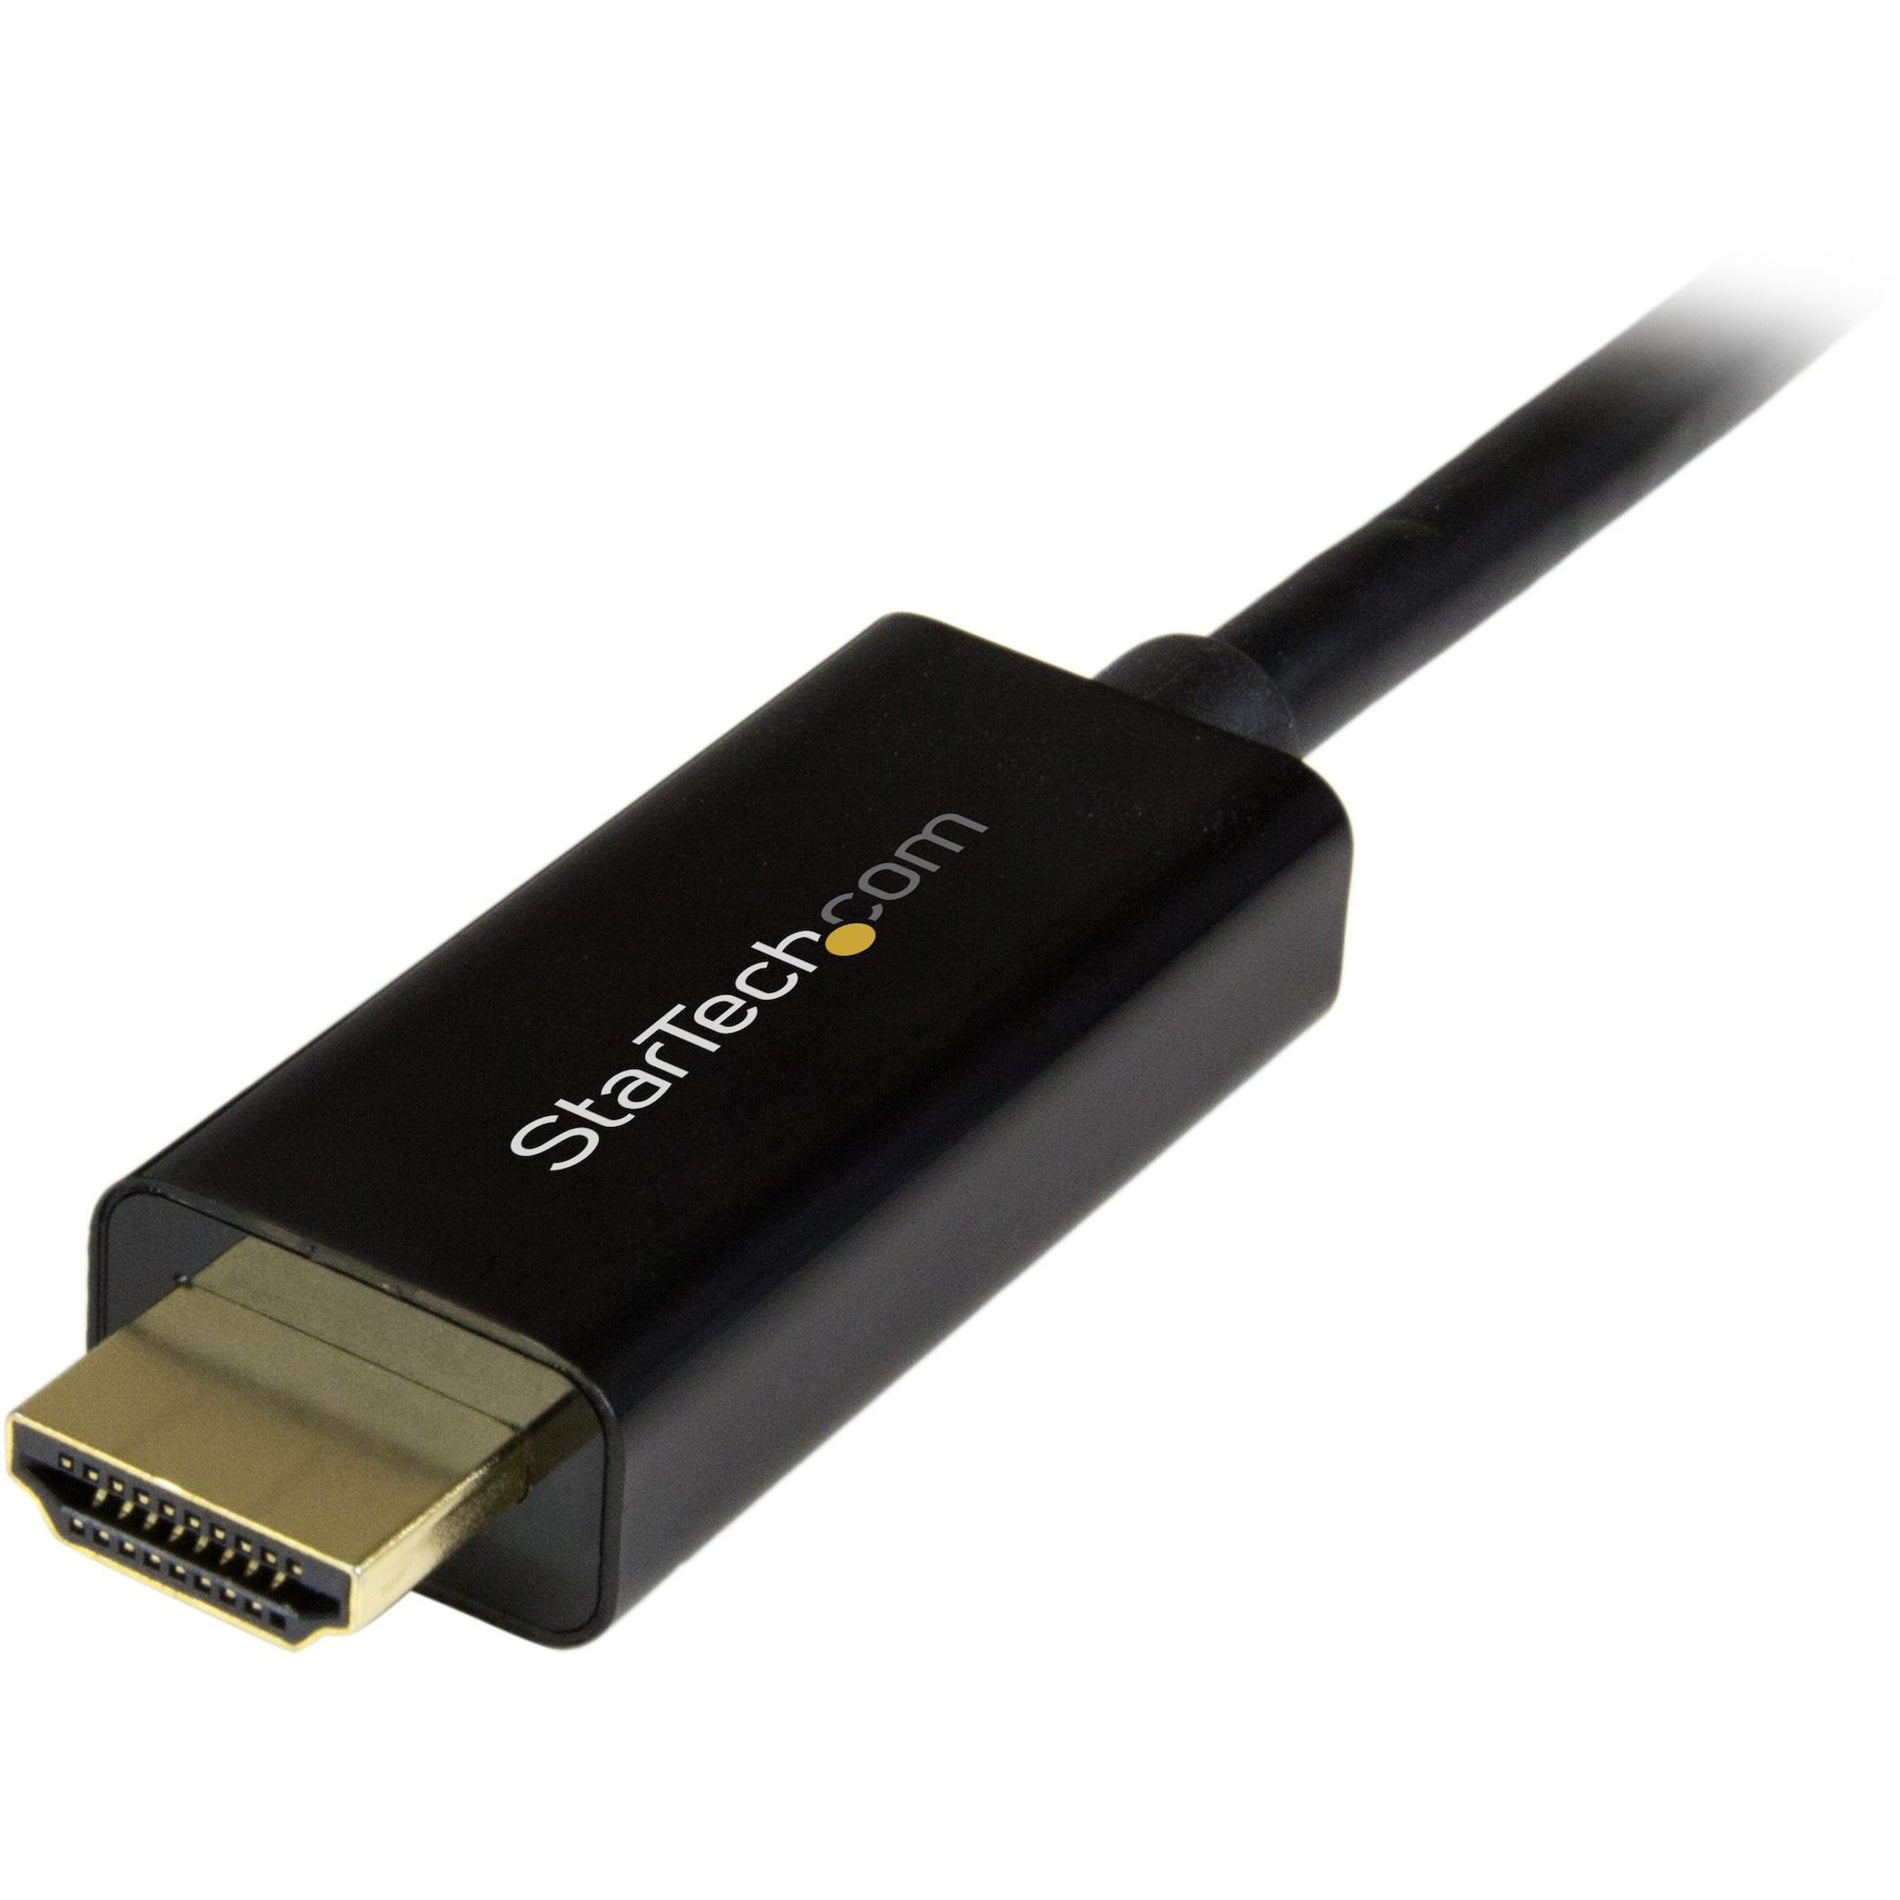 StarTech.com DP2HDMM2MB DisplayPort to HDMI Converter Cable - 6 ft (2m) - 4K, Eliminate Clutter by Connecting Your PC Directly to an HDMI Display